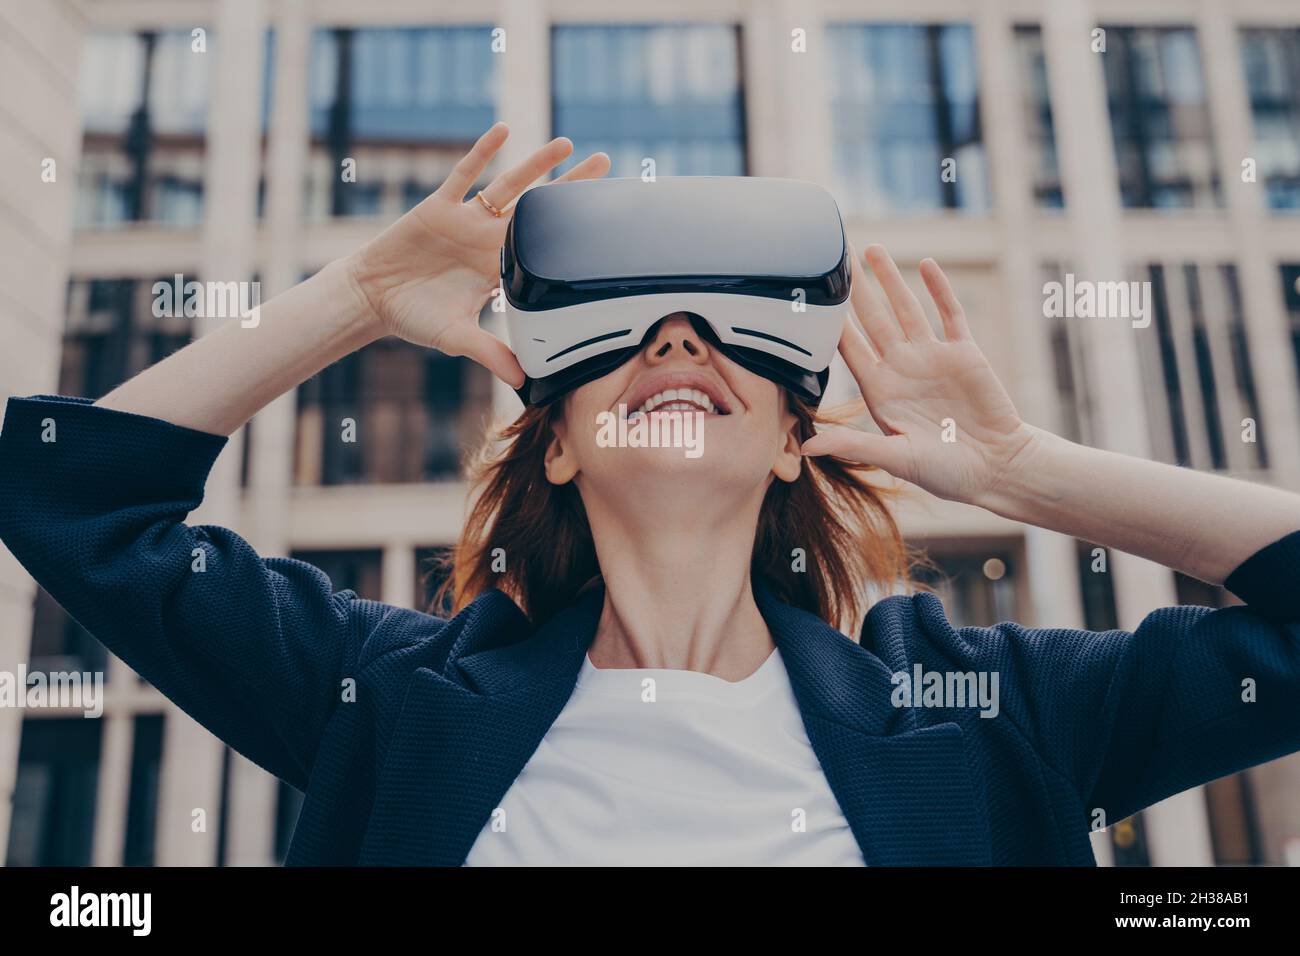 Immersed woman looking up in virtual reality while wearing portable VR, standing on city street Stock Photo